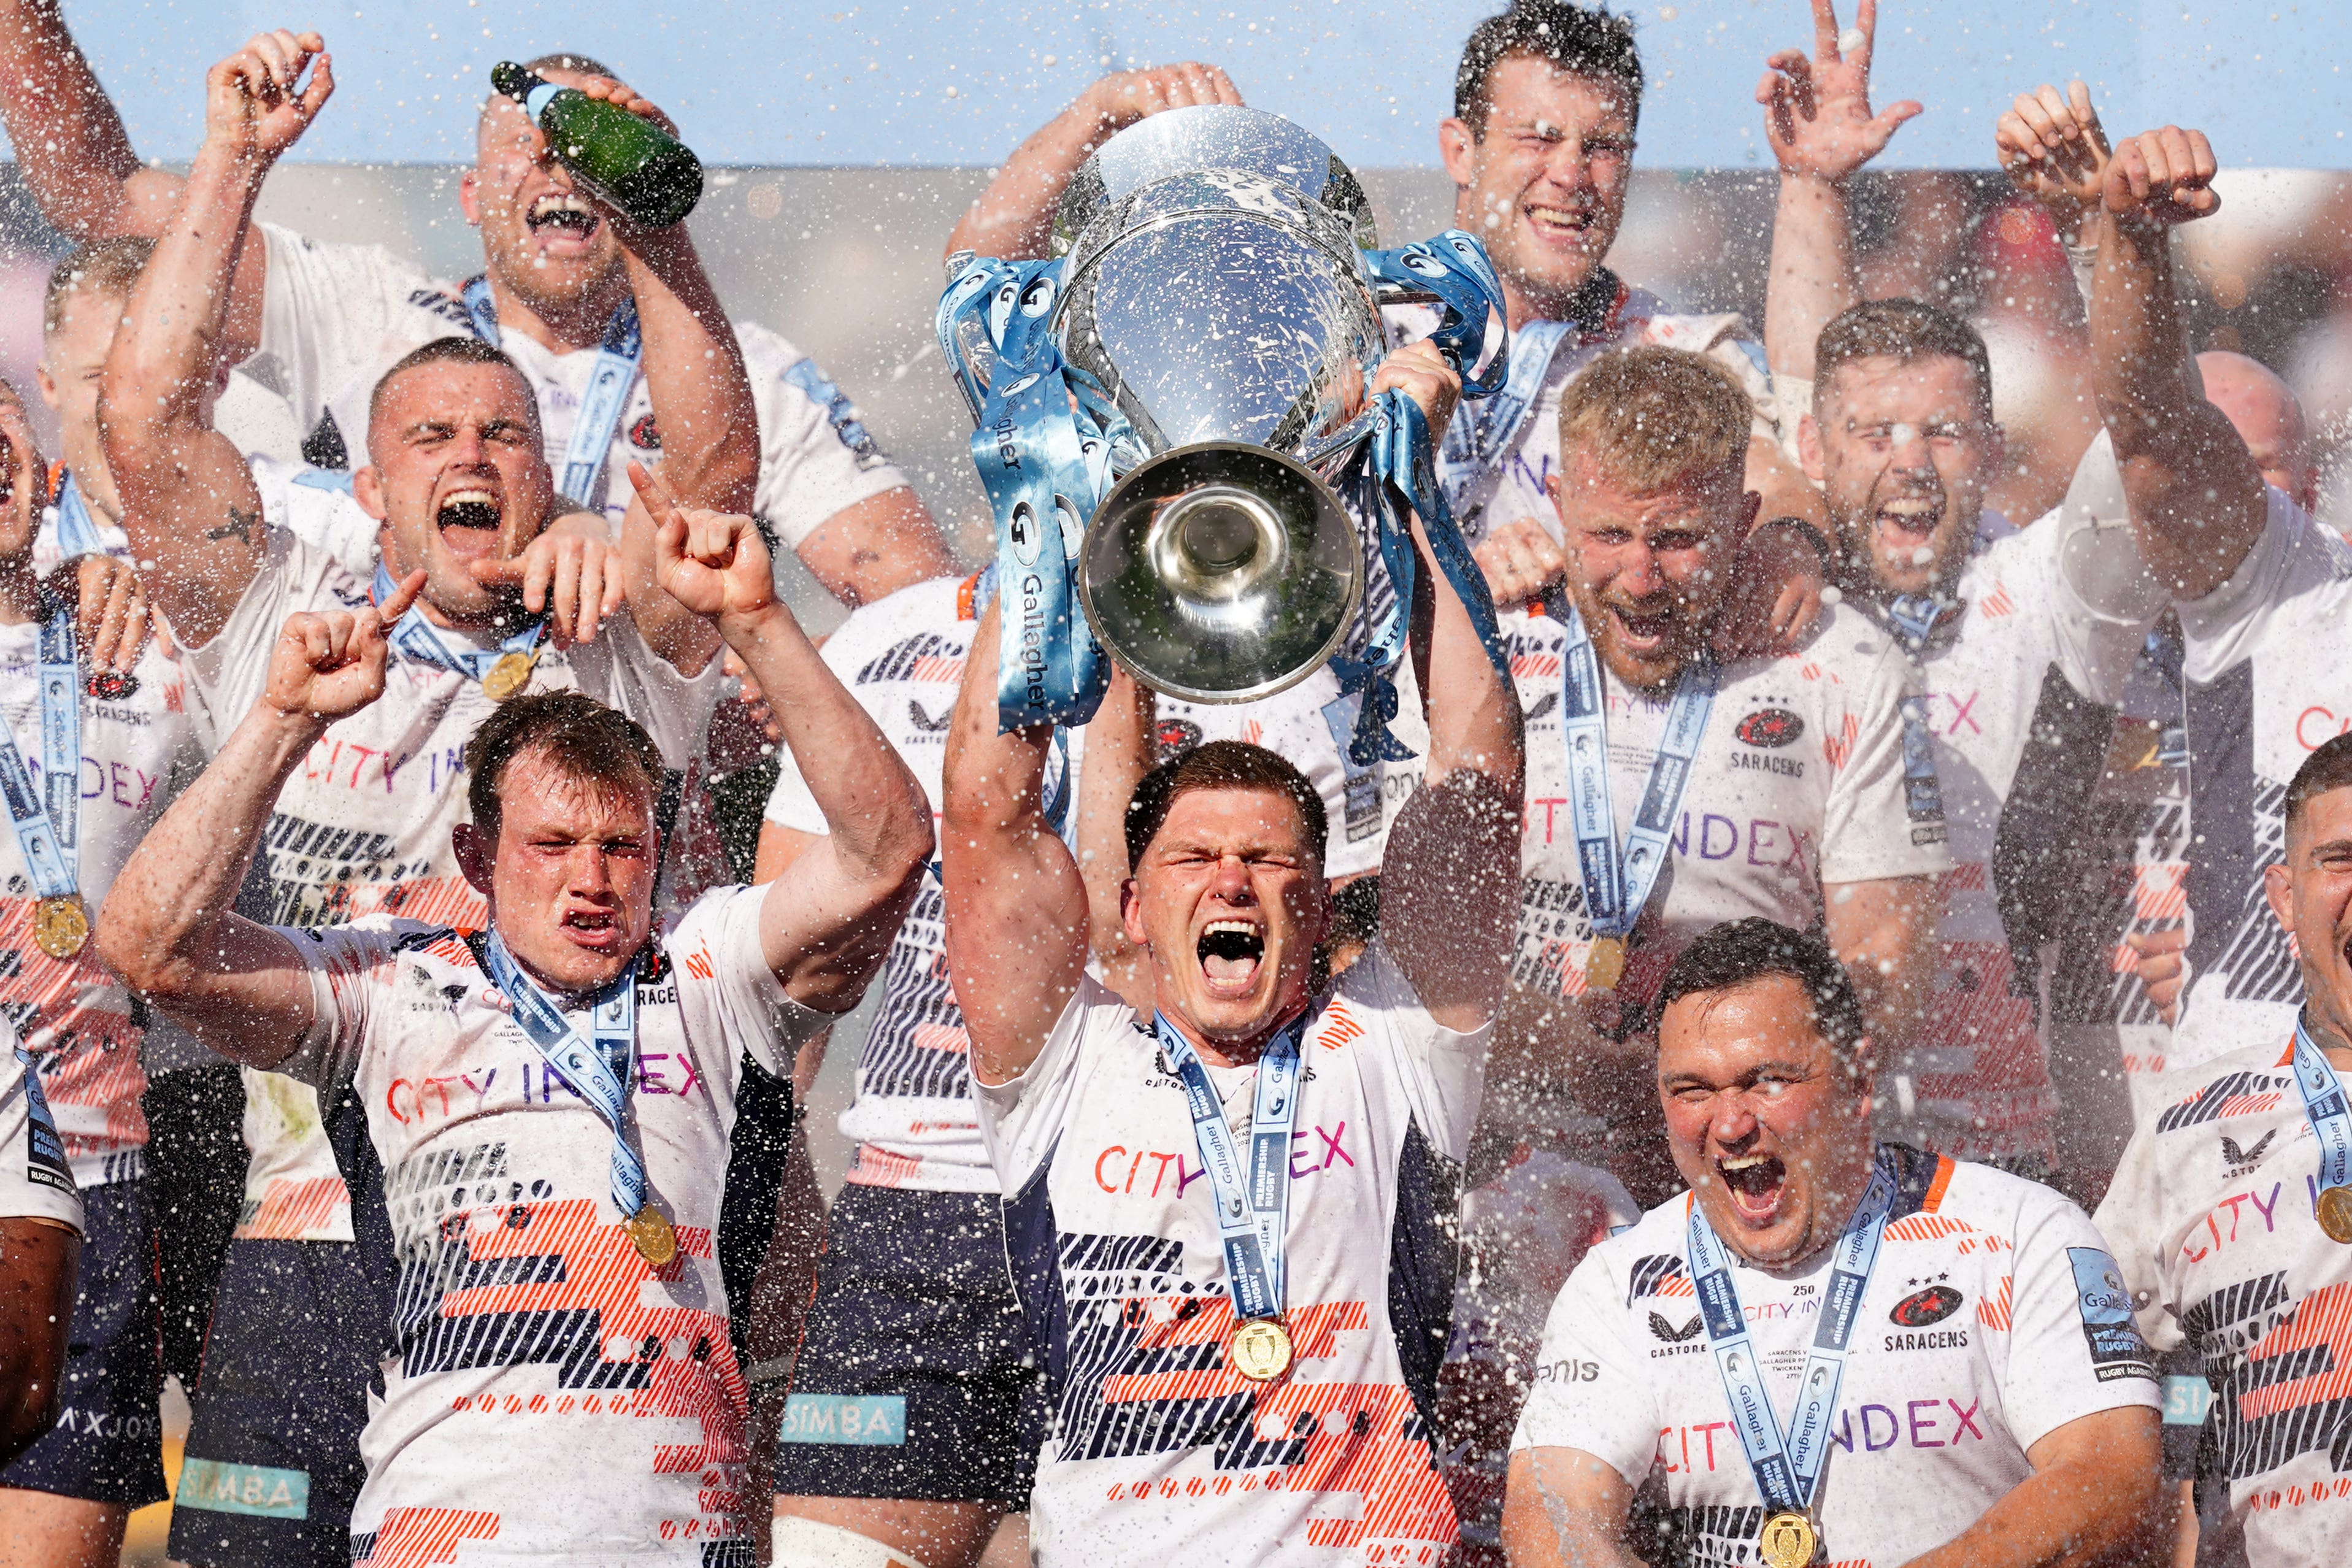 Saracens will look to defend the title they beat Sale Sharks in the final to win